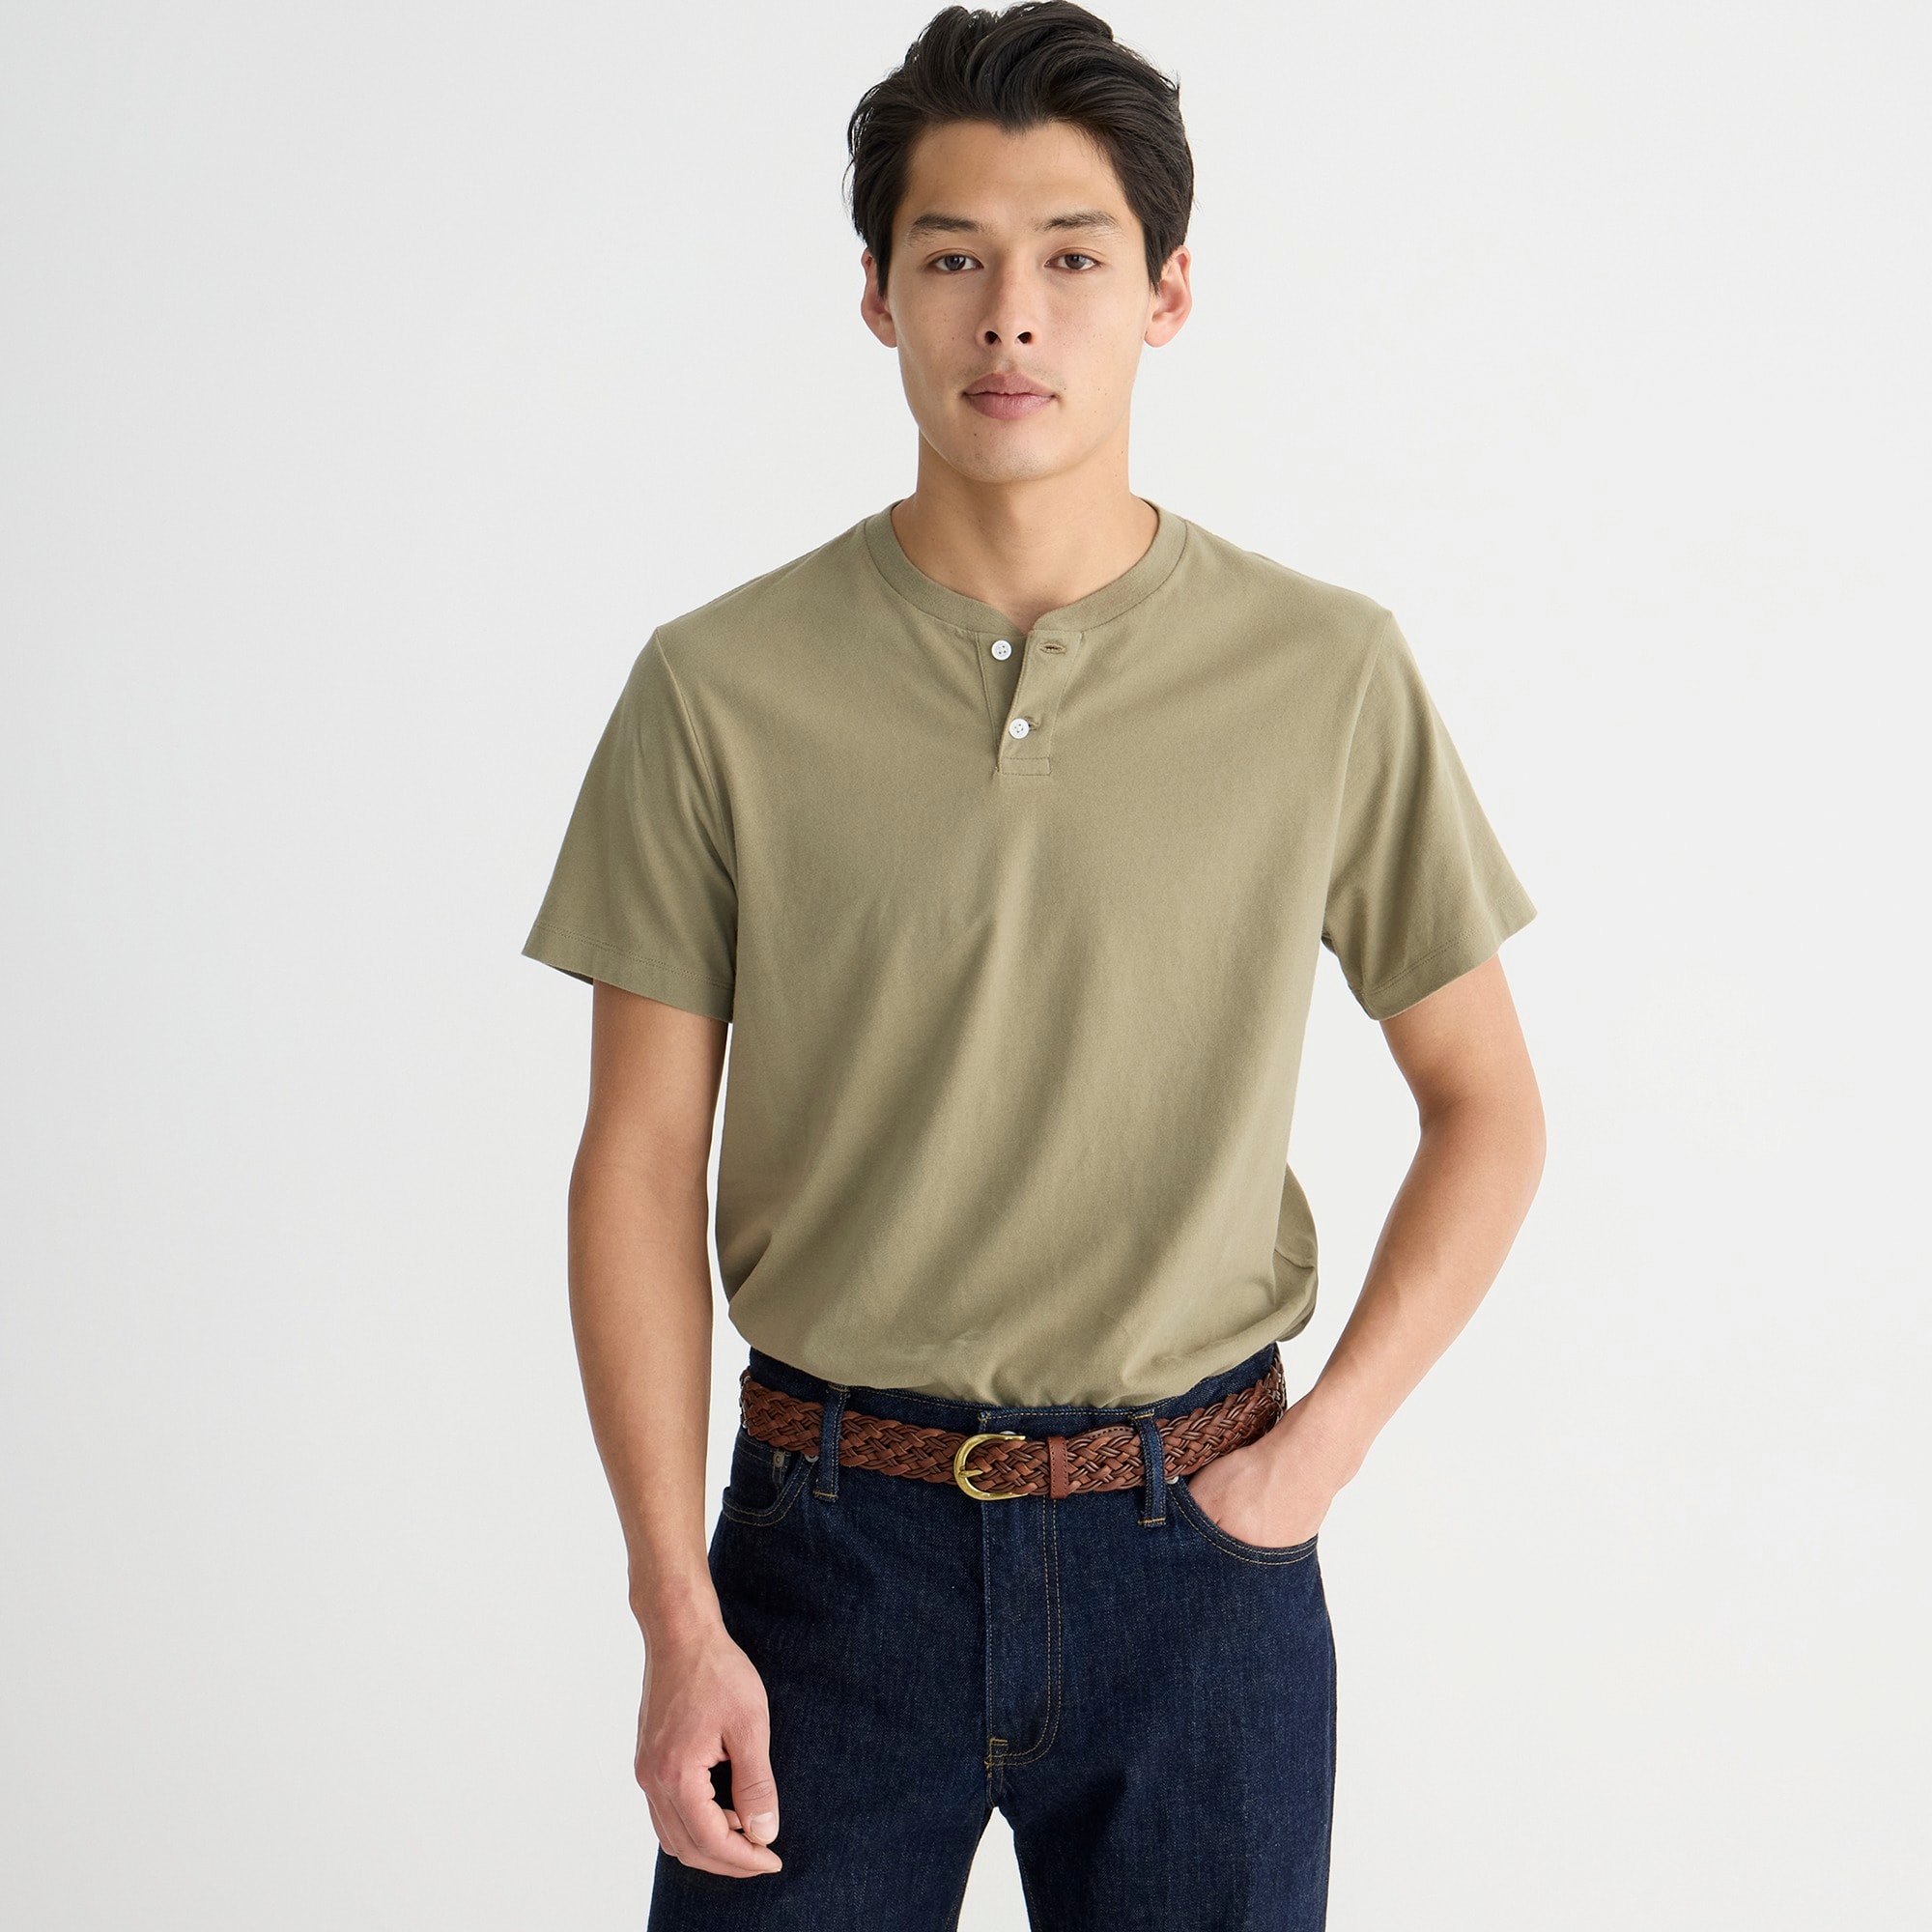 mens Short-sleeve sueded cotton henley